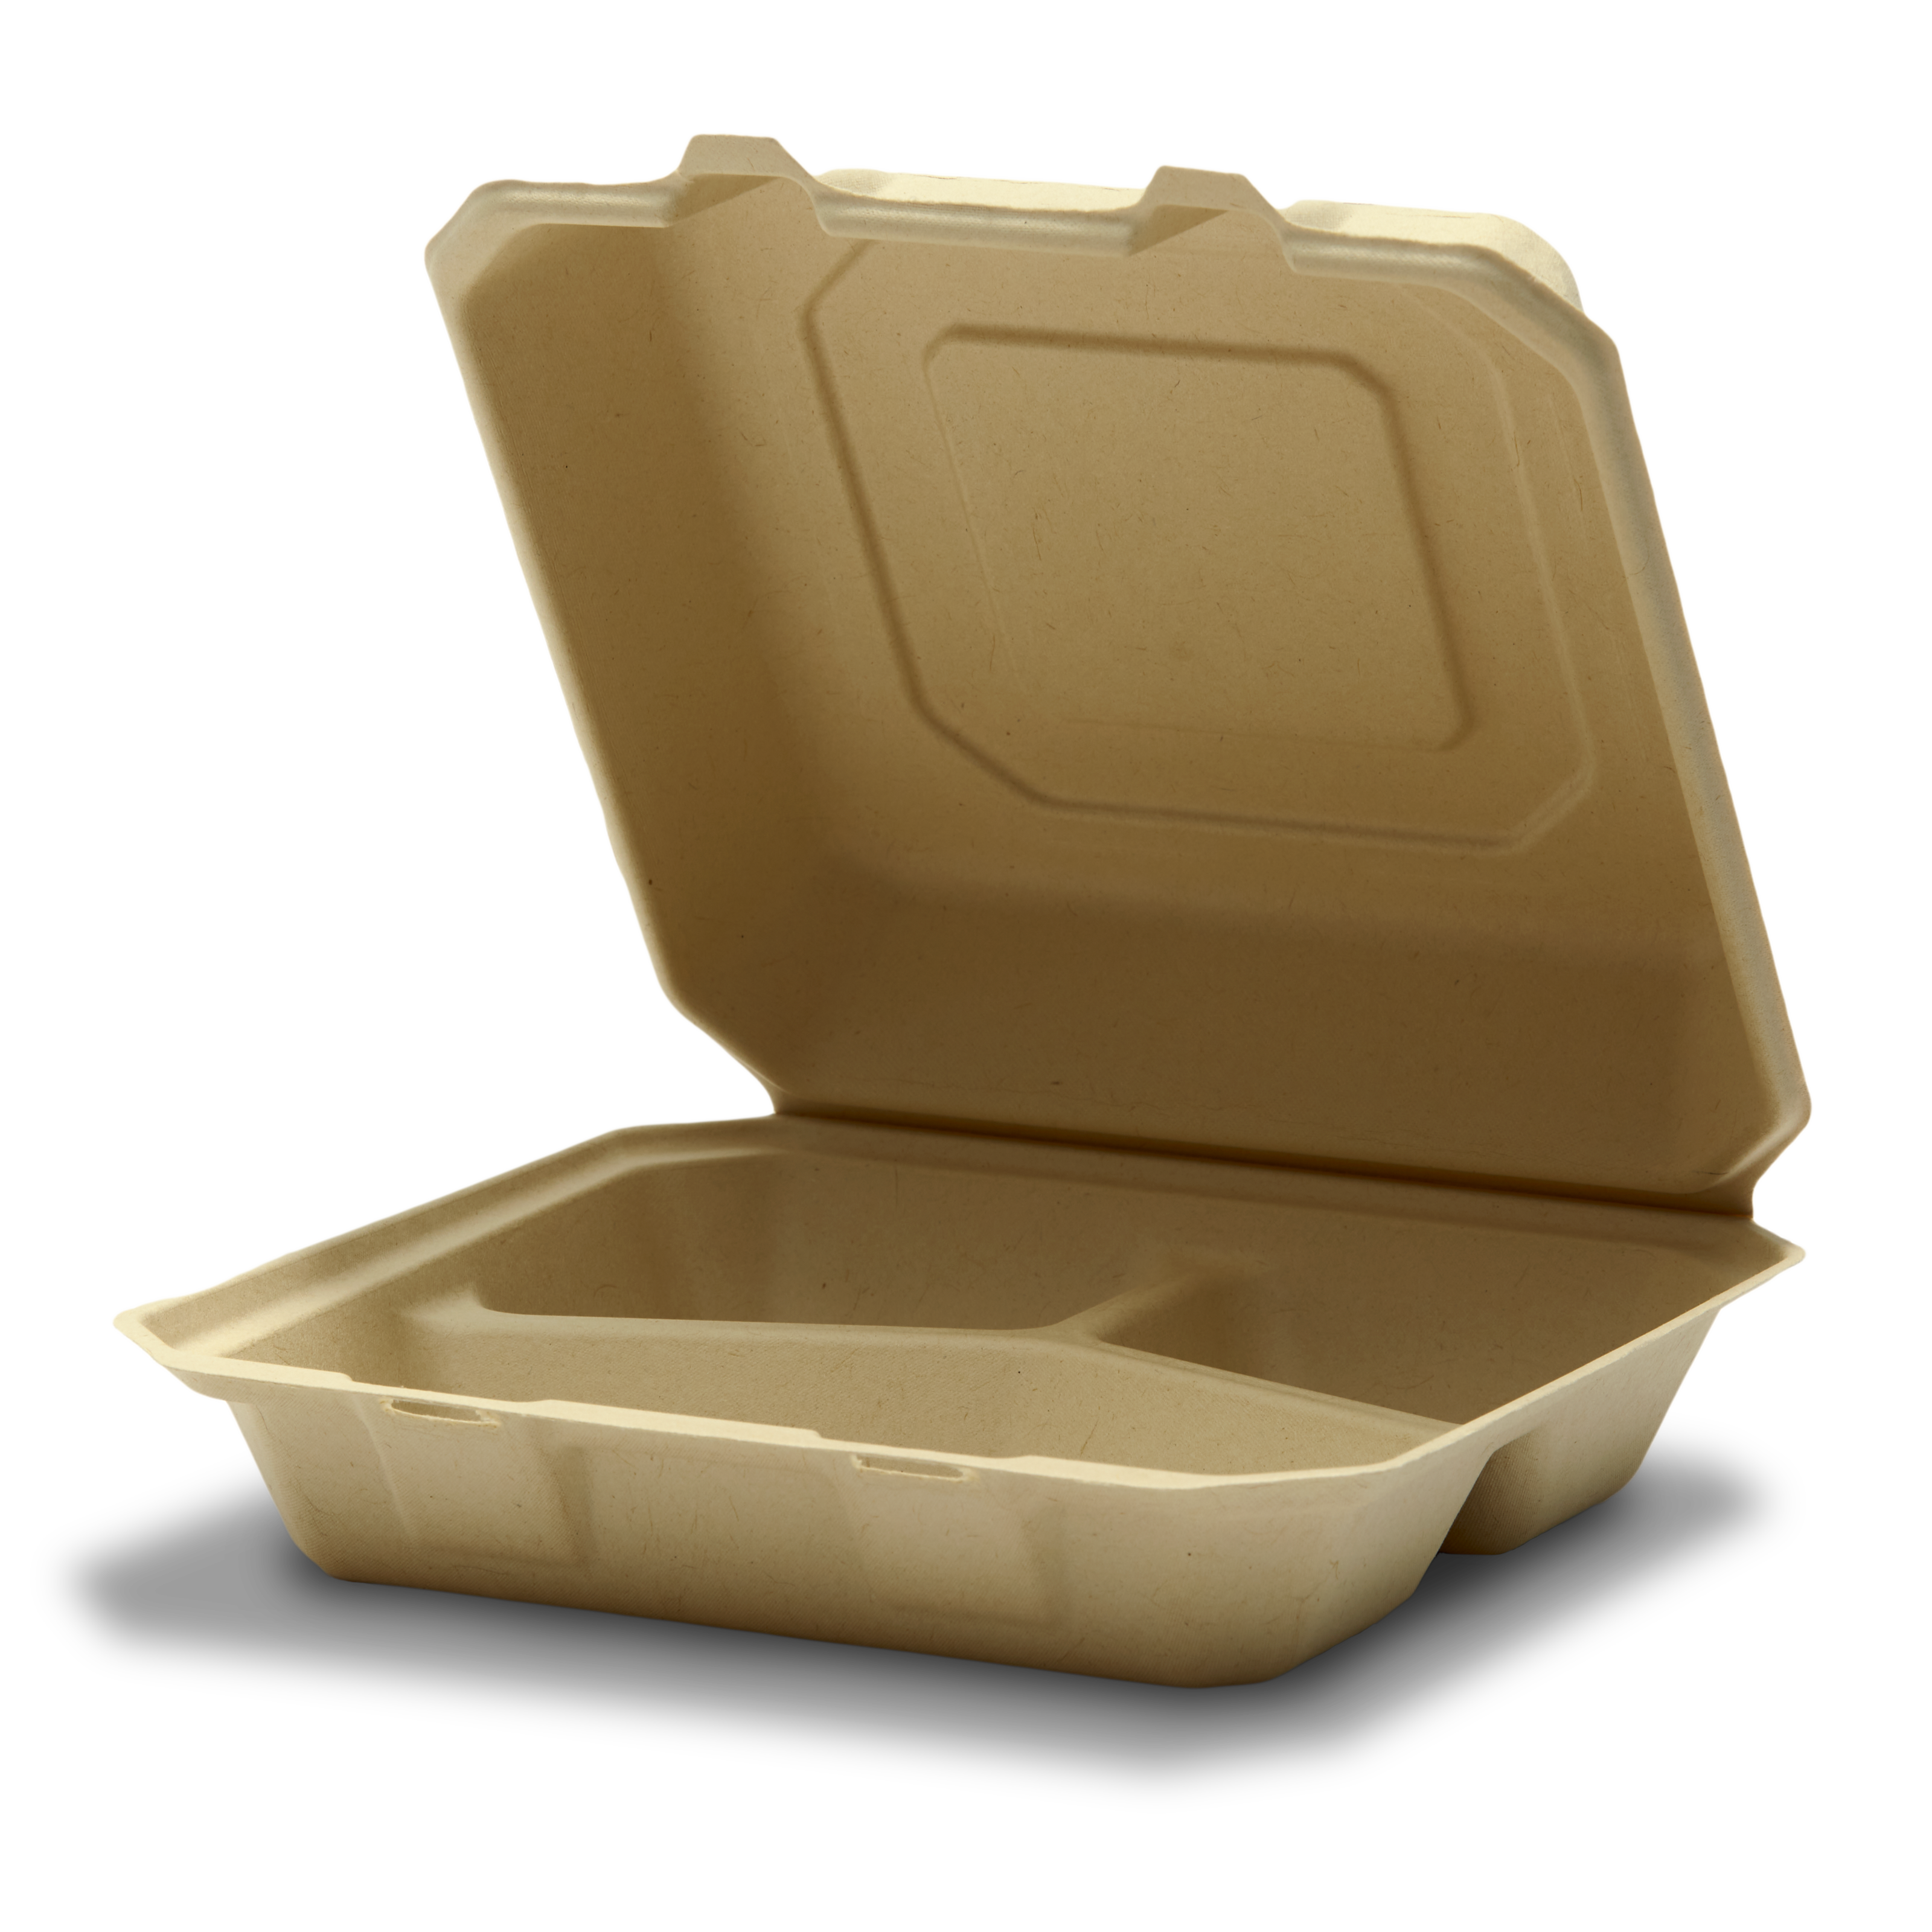 https://cdn.shopify.com/s/files/1/0612/3690/4162/products/tel-433490_tellus-clamshell-9x9-3-compartment-compostable_0c36e257-5fe6-437a-a1b4-0f9f186abb73.png?v=1661198276